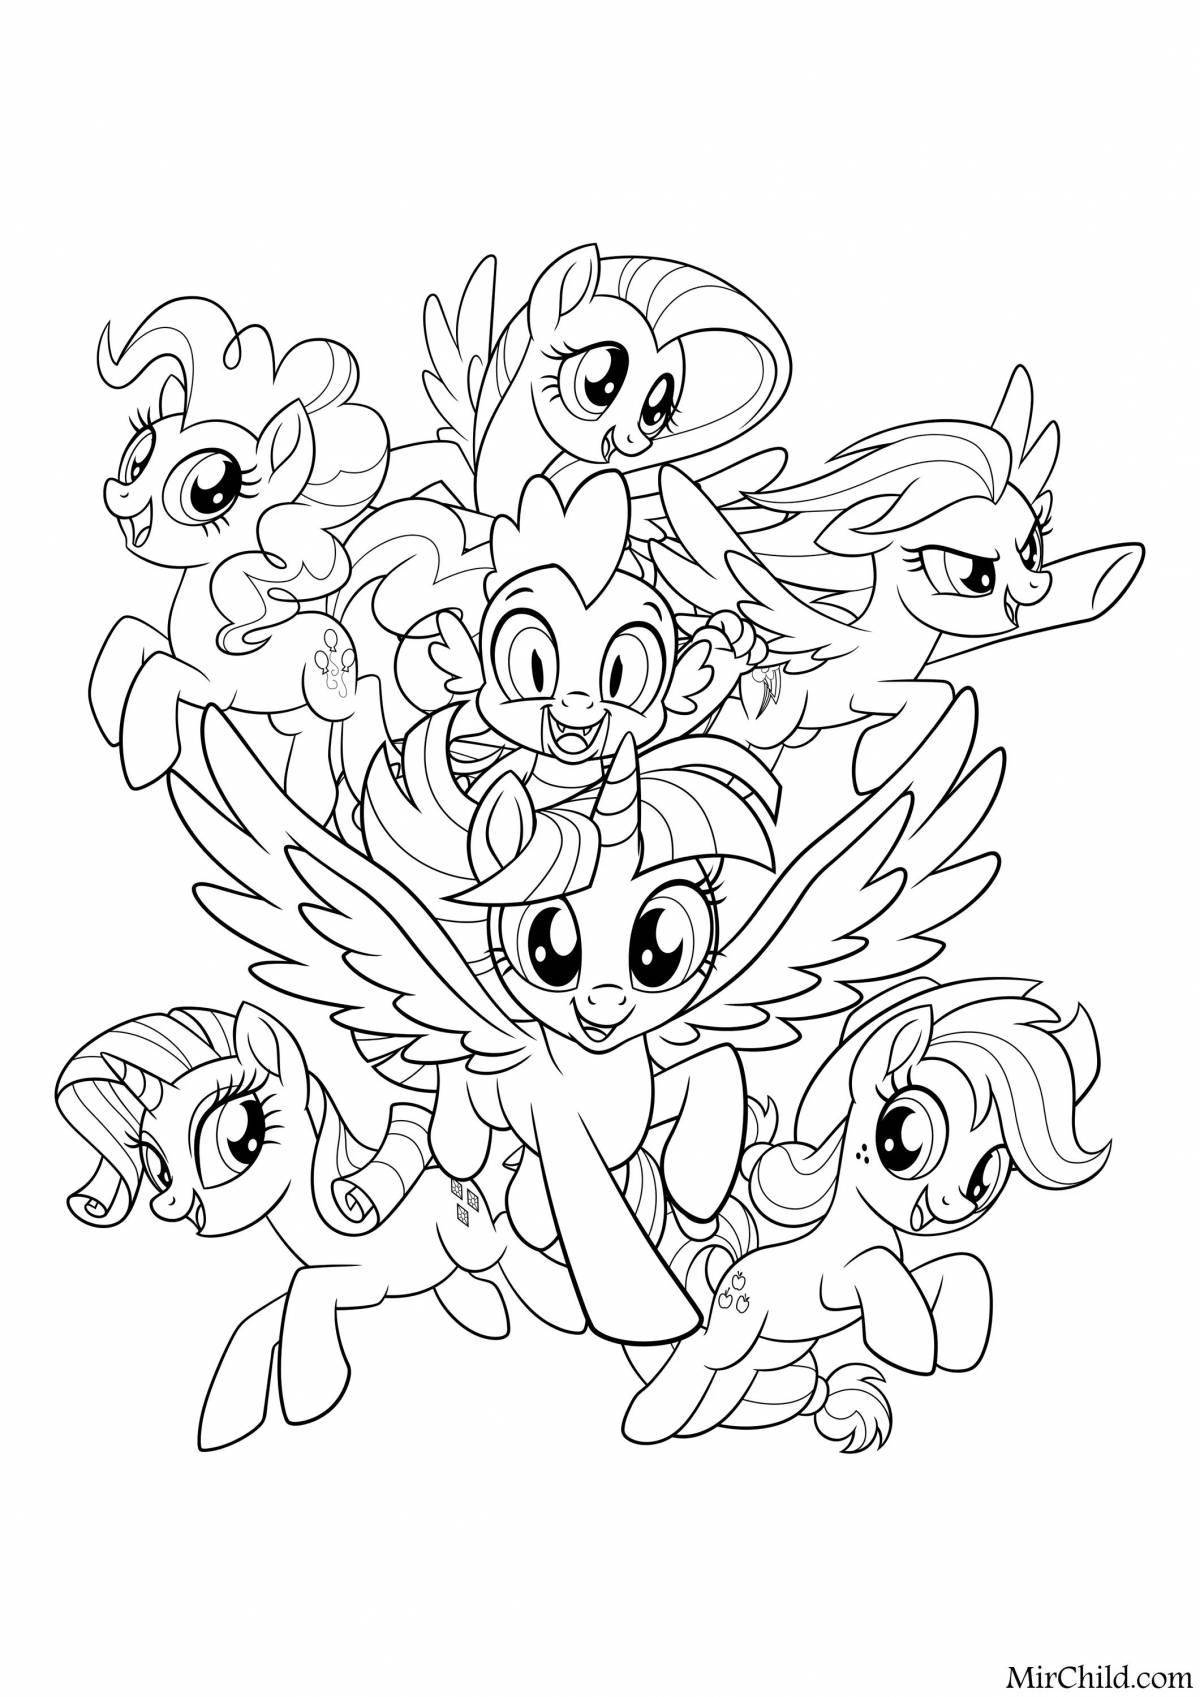 Color-frenzy coloring page all ponies together